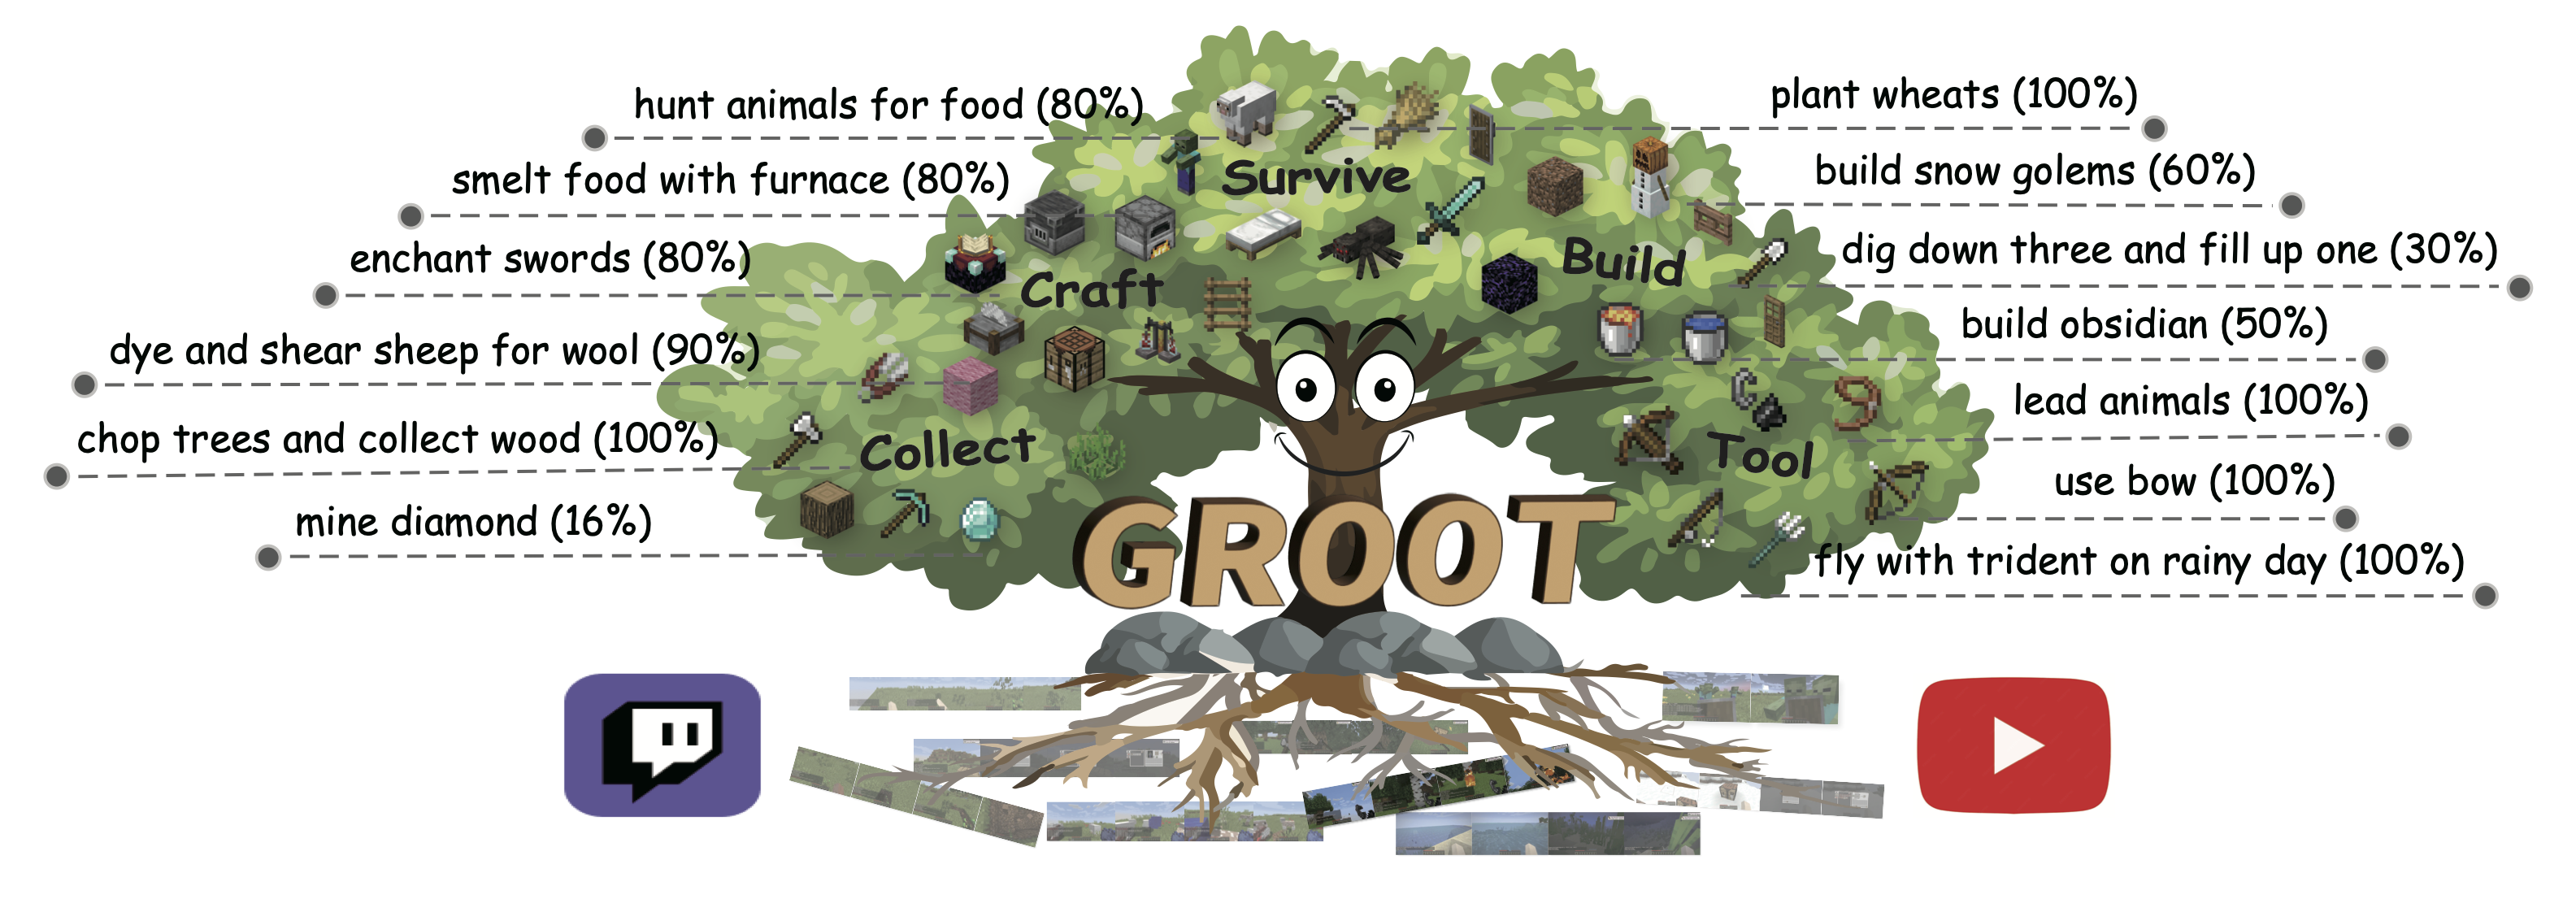 GROOT: Learning to Follow Instructions by Watching Gameplay Videos